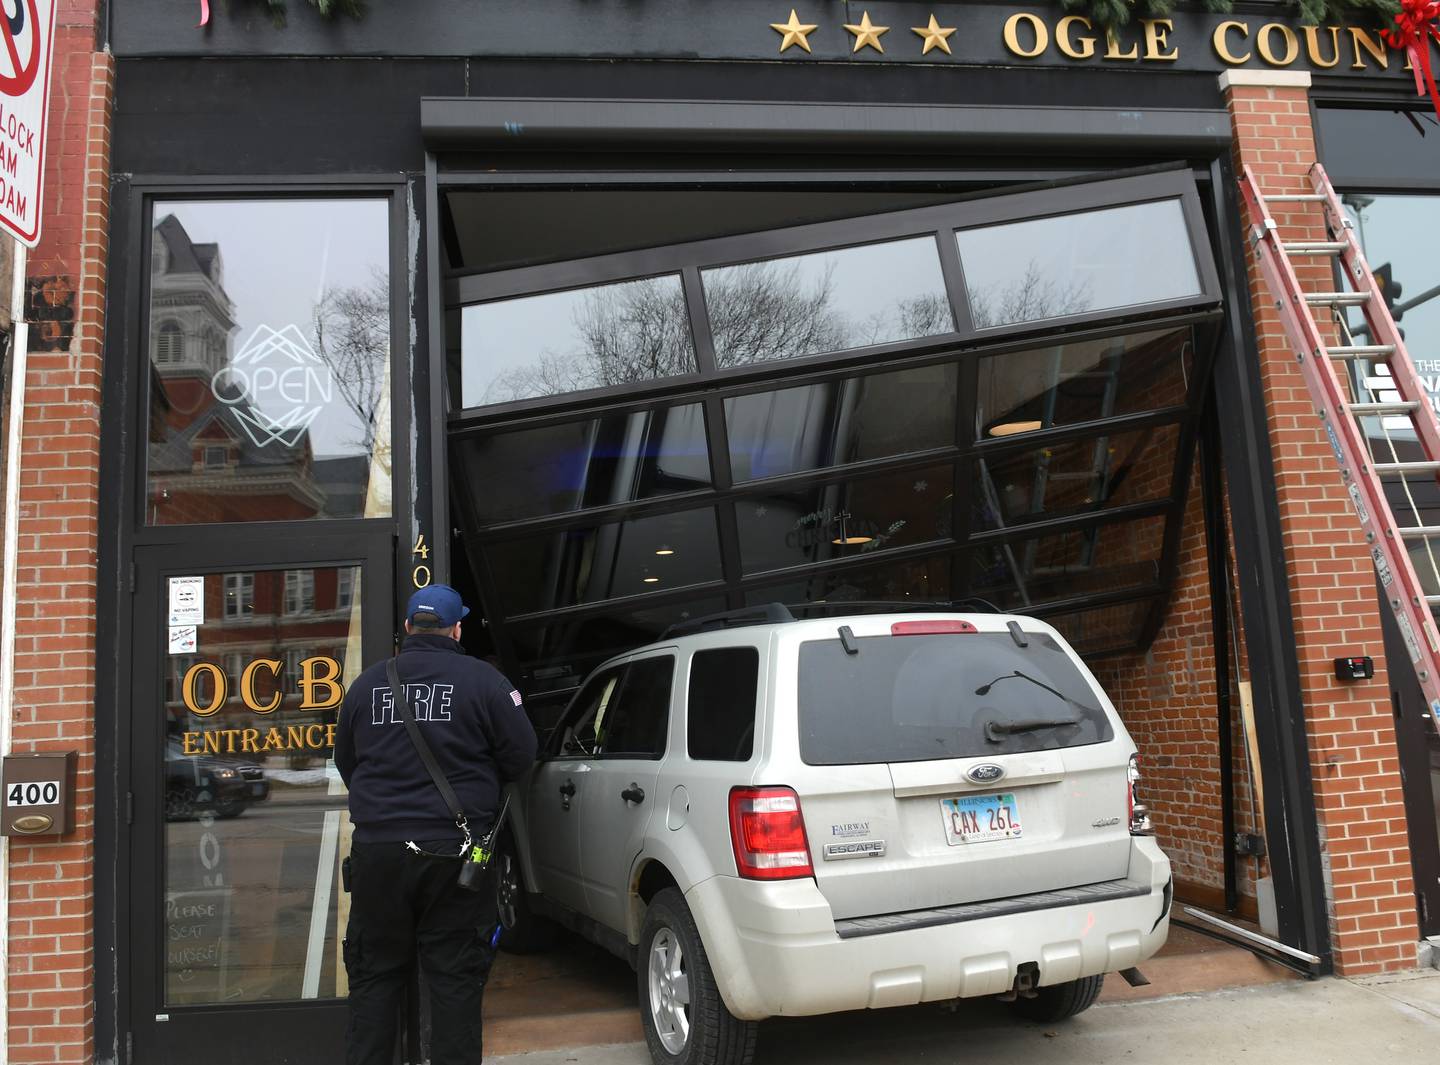 A car crashed into the Ogle County Brewery in downtown Oregon early Sunday afternoon after being hit by another vehicle at the intersection of Illinois 64 and Illinois 2. Drivers and customers within the company were not injured.